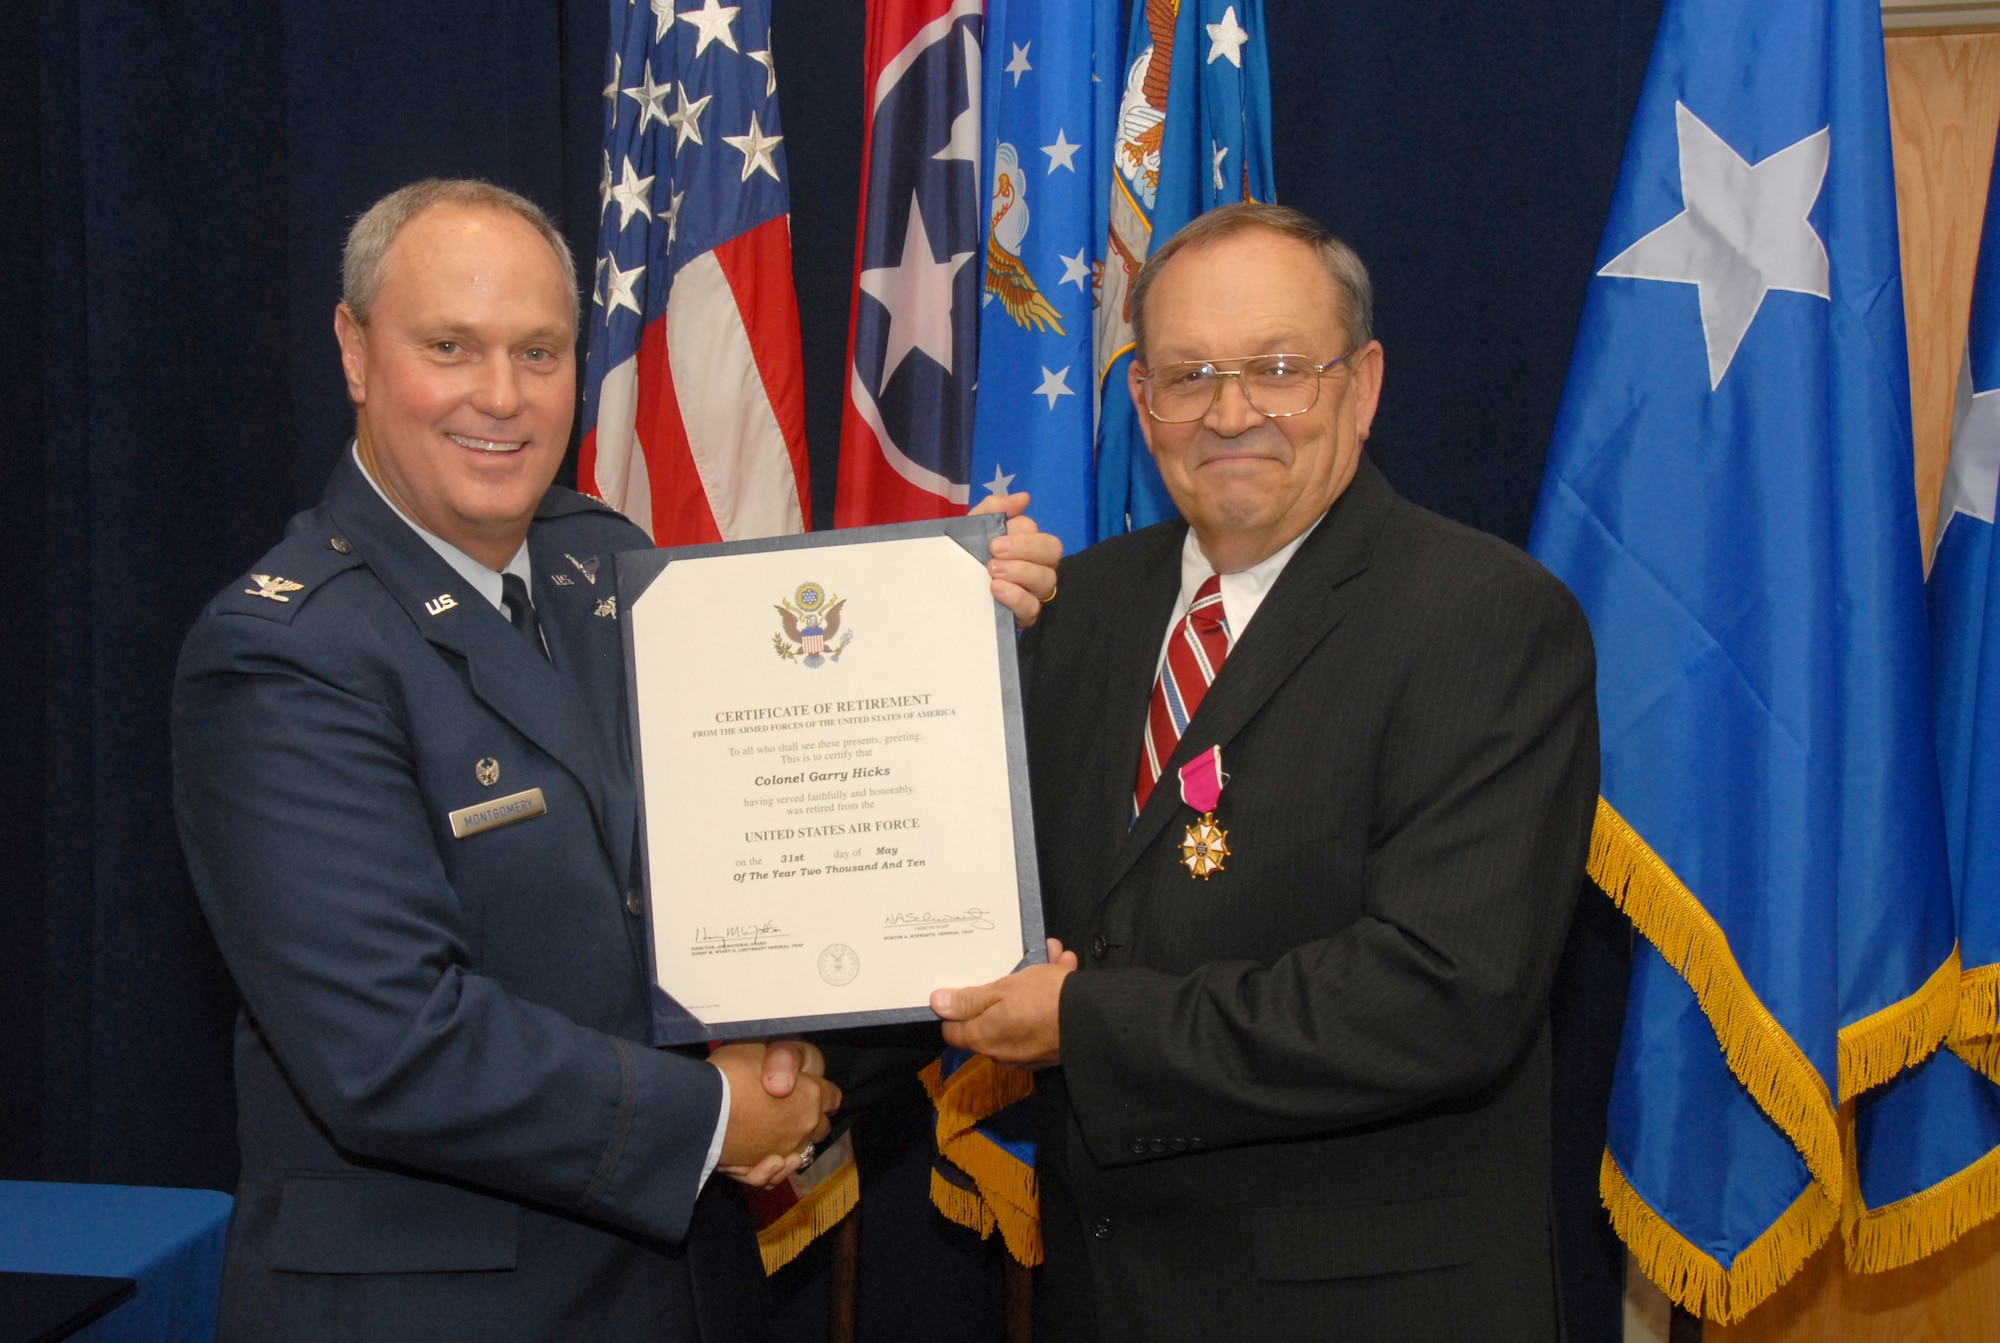 Col Gary Hicks recieves his certificate of retirement from Colonel Harry  Montgomery during his retirement ceremony.